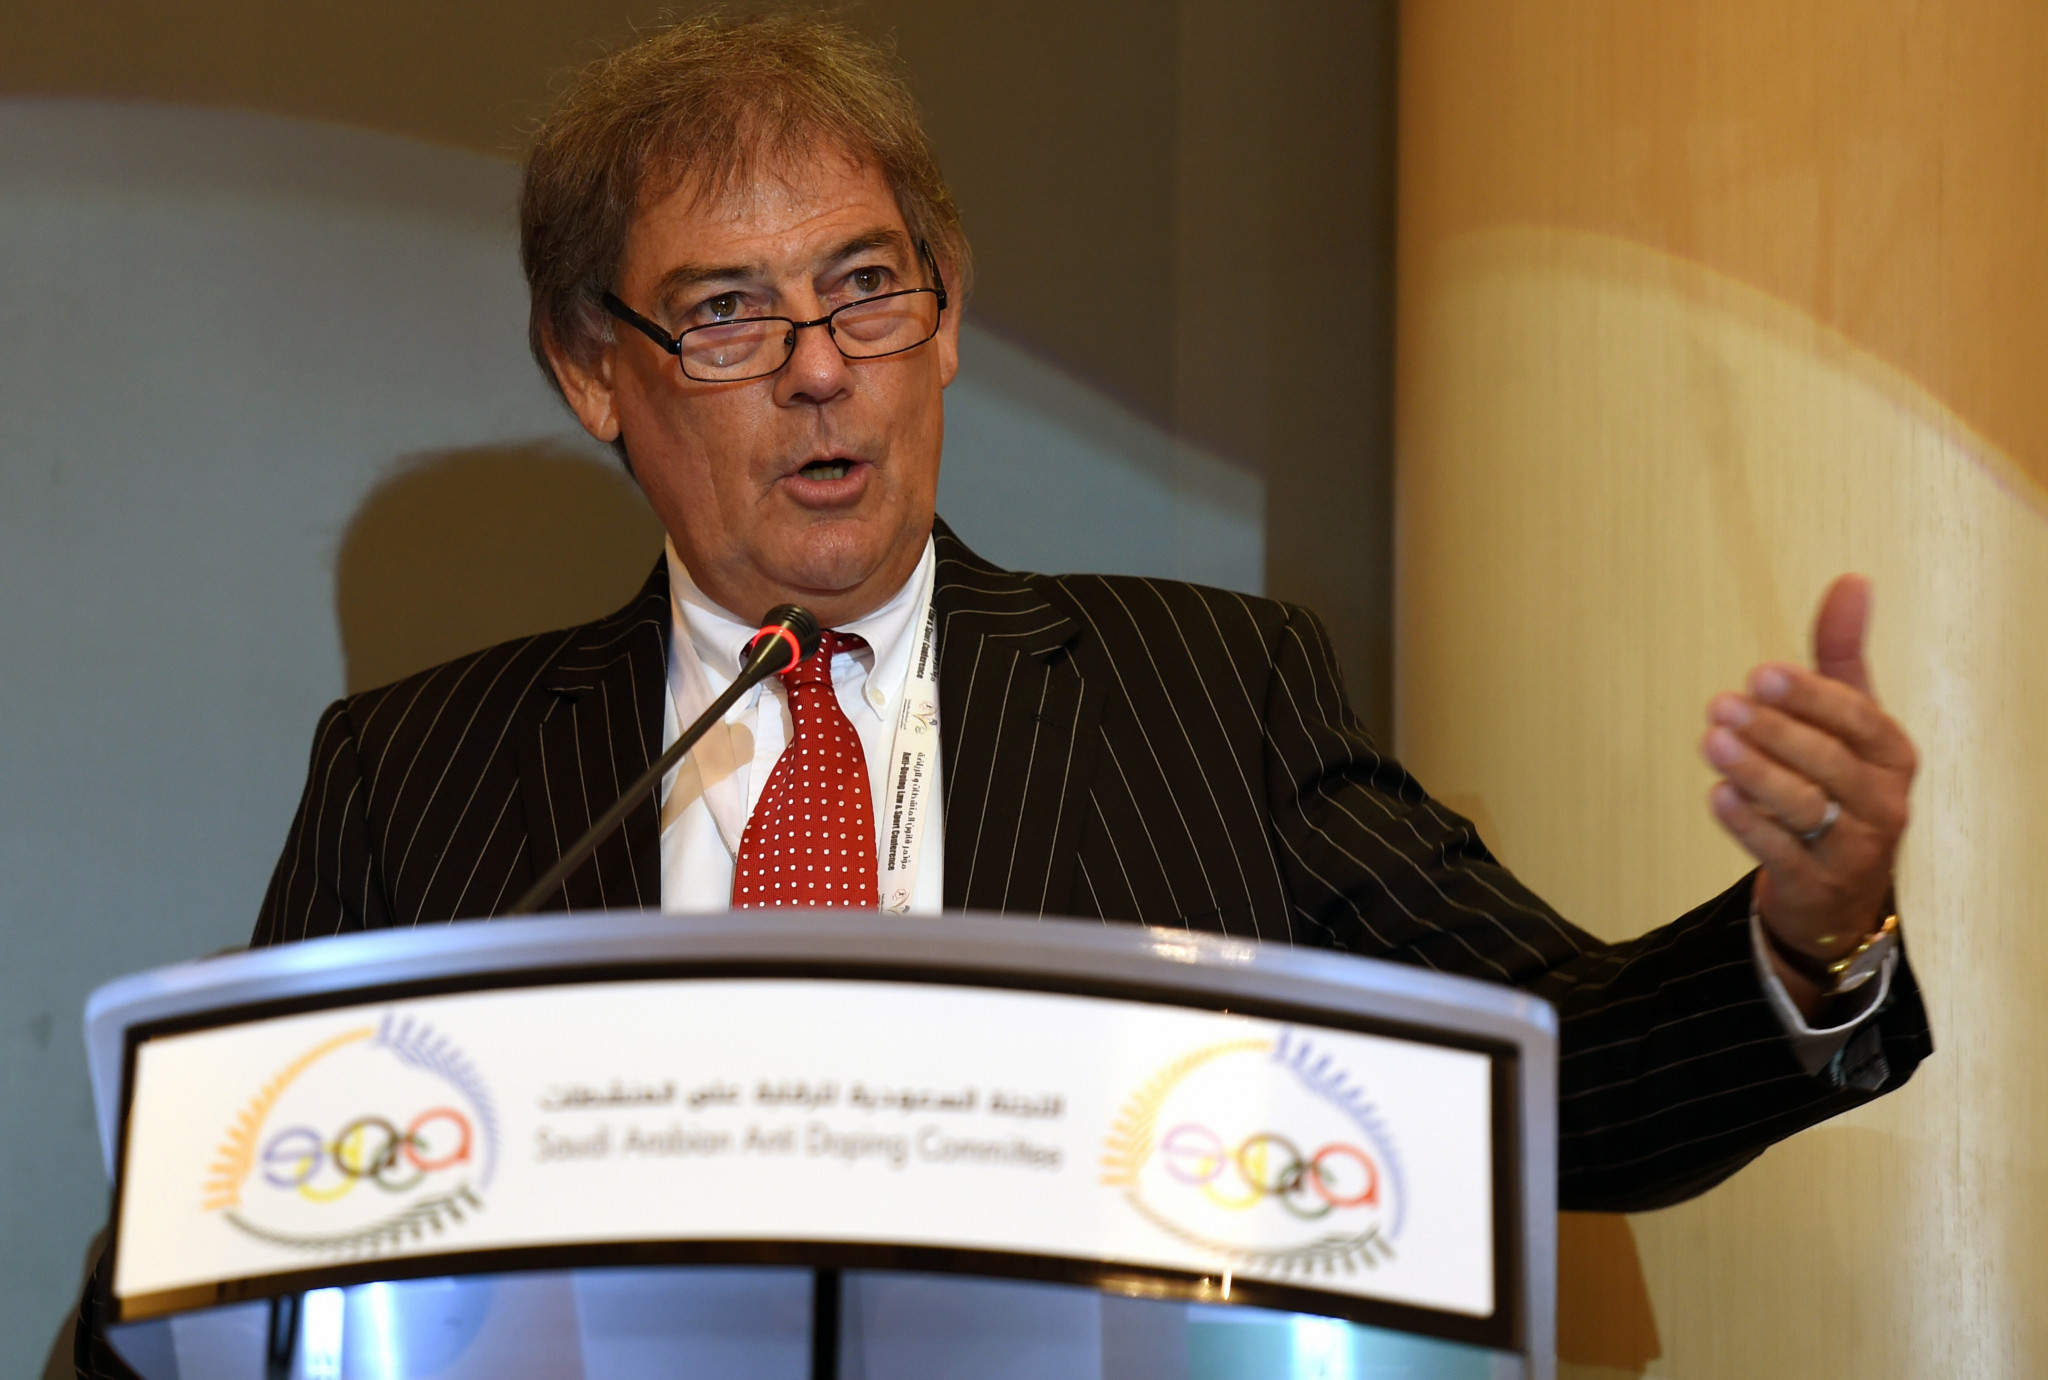 David Howman, head of the IAAF's Integrity Unity will present a keynote speech on protecting athletes' rights  ©Getty Images